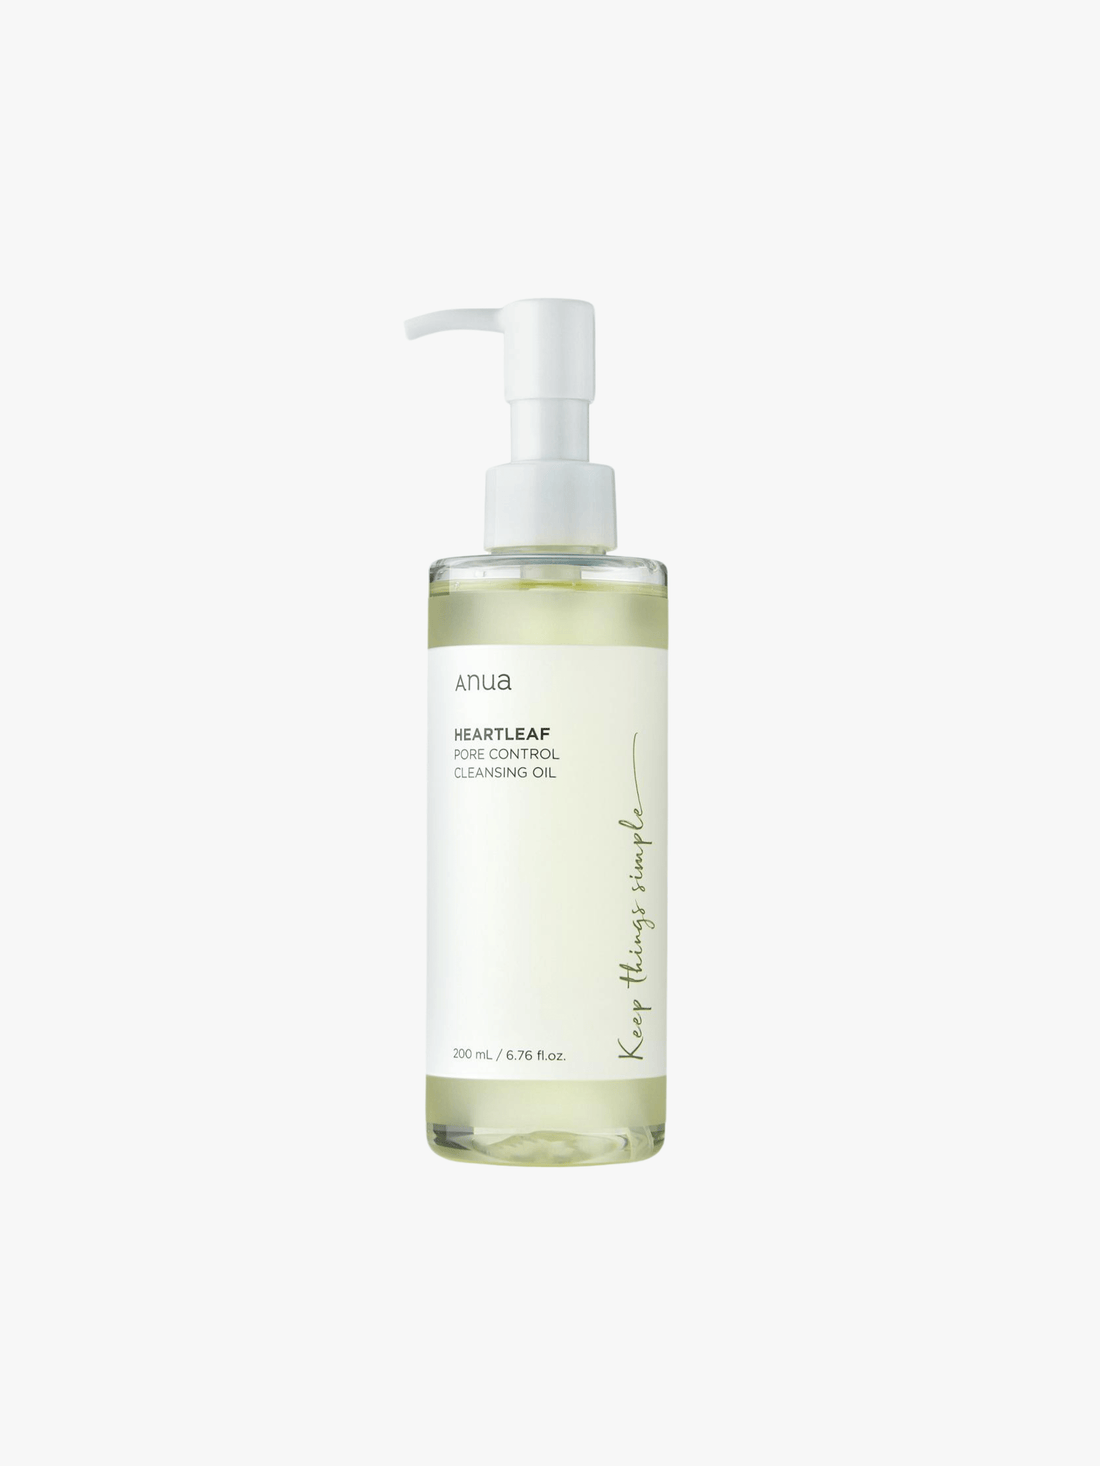 Anua - Cleansing Oil - Heartleaf Pore Control Cleansing Oil